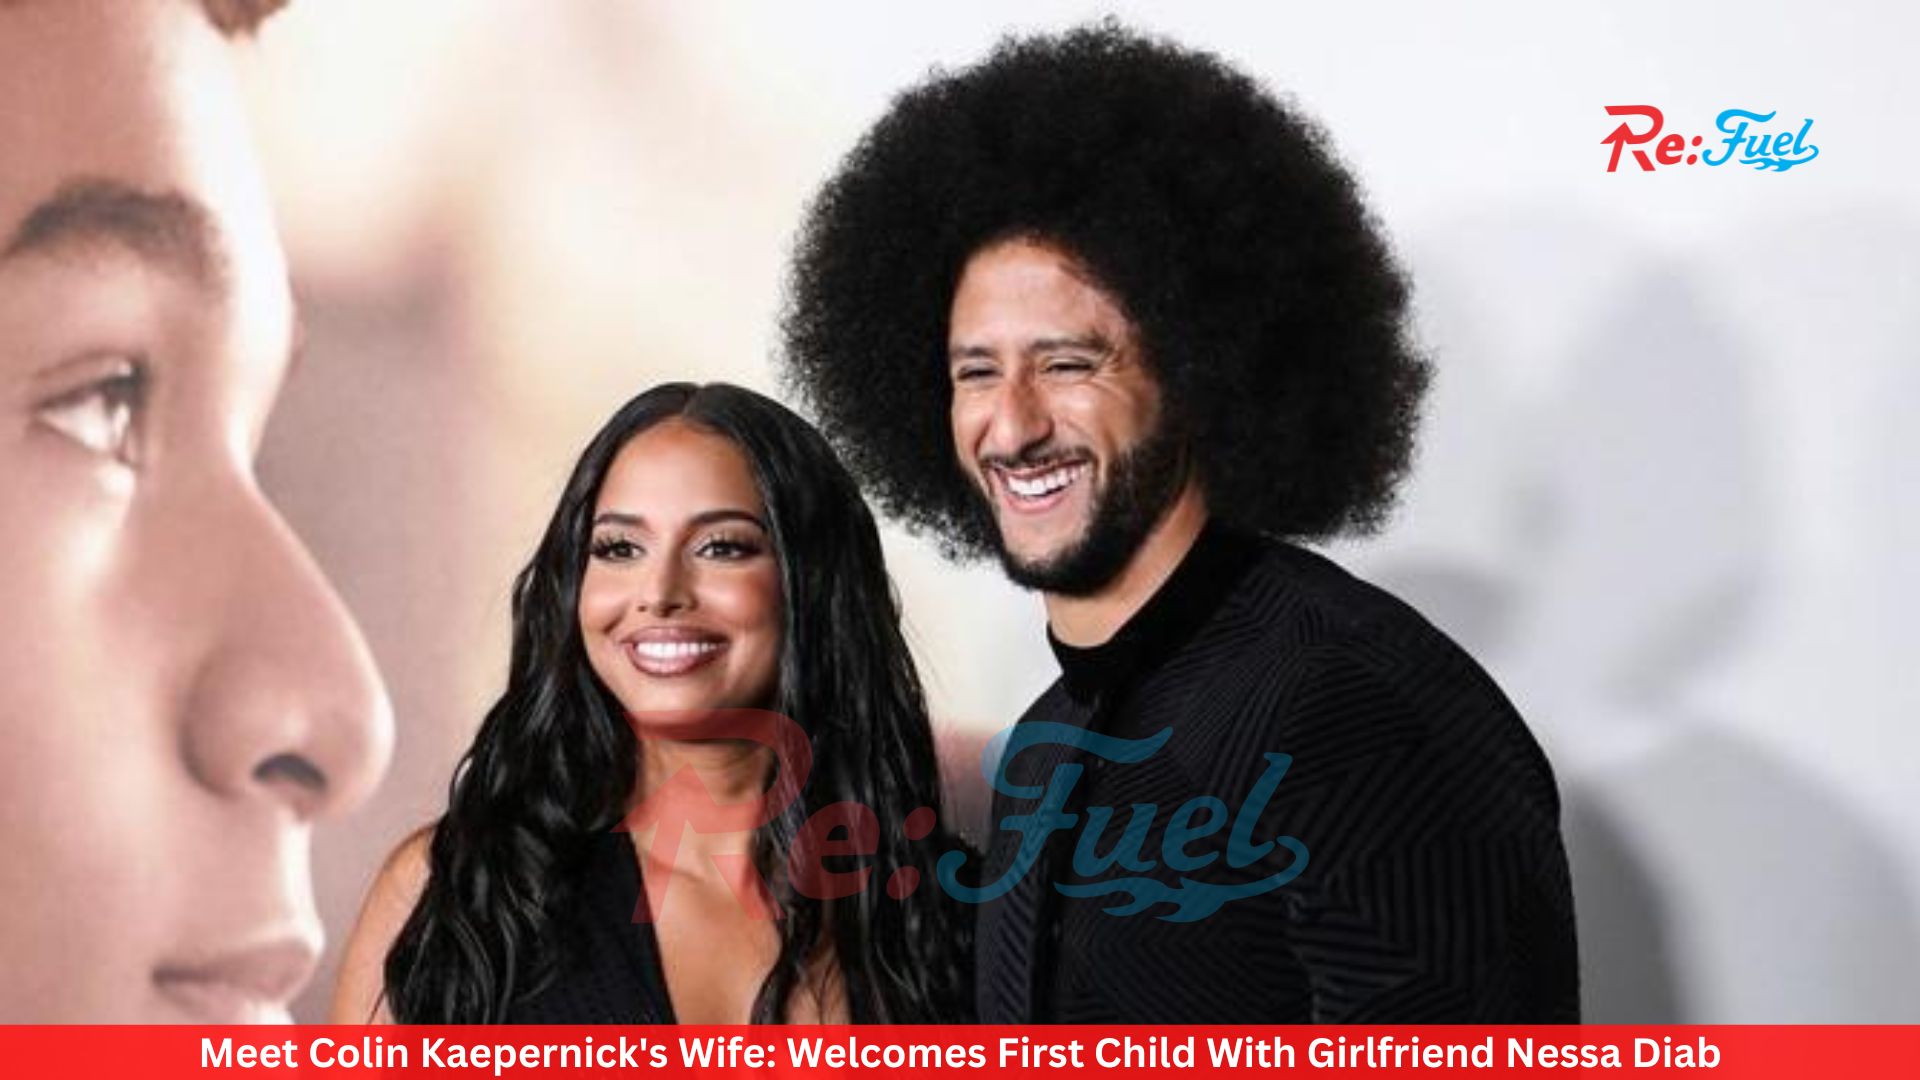 Meet Colin Kaepernick's Wife: Welcomes First Child With Girlfriend Nessa Diab